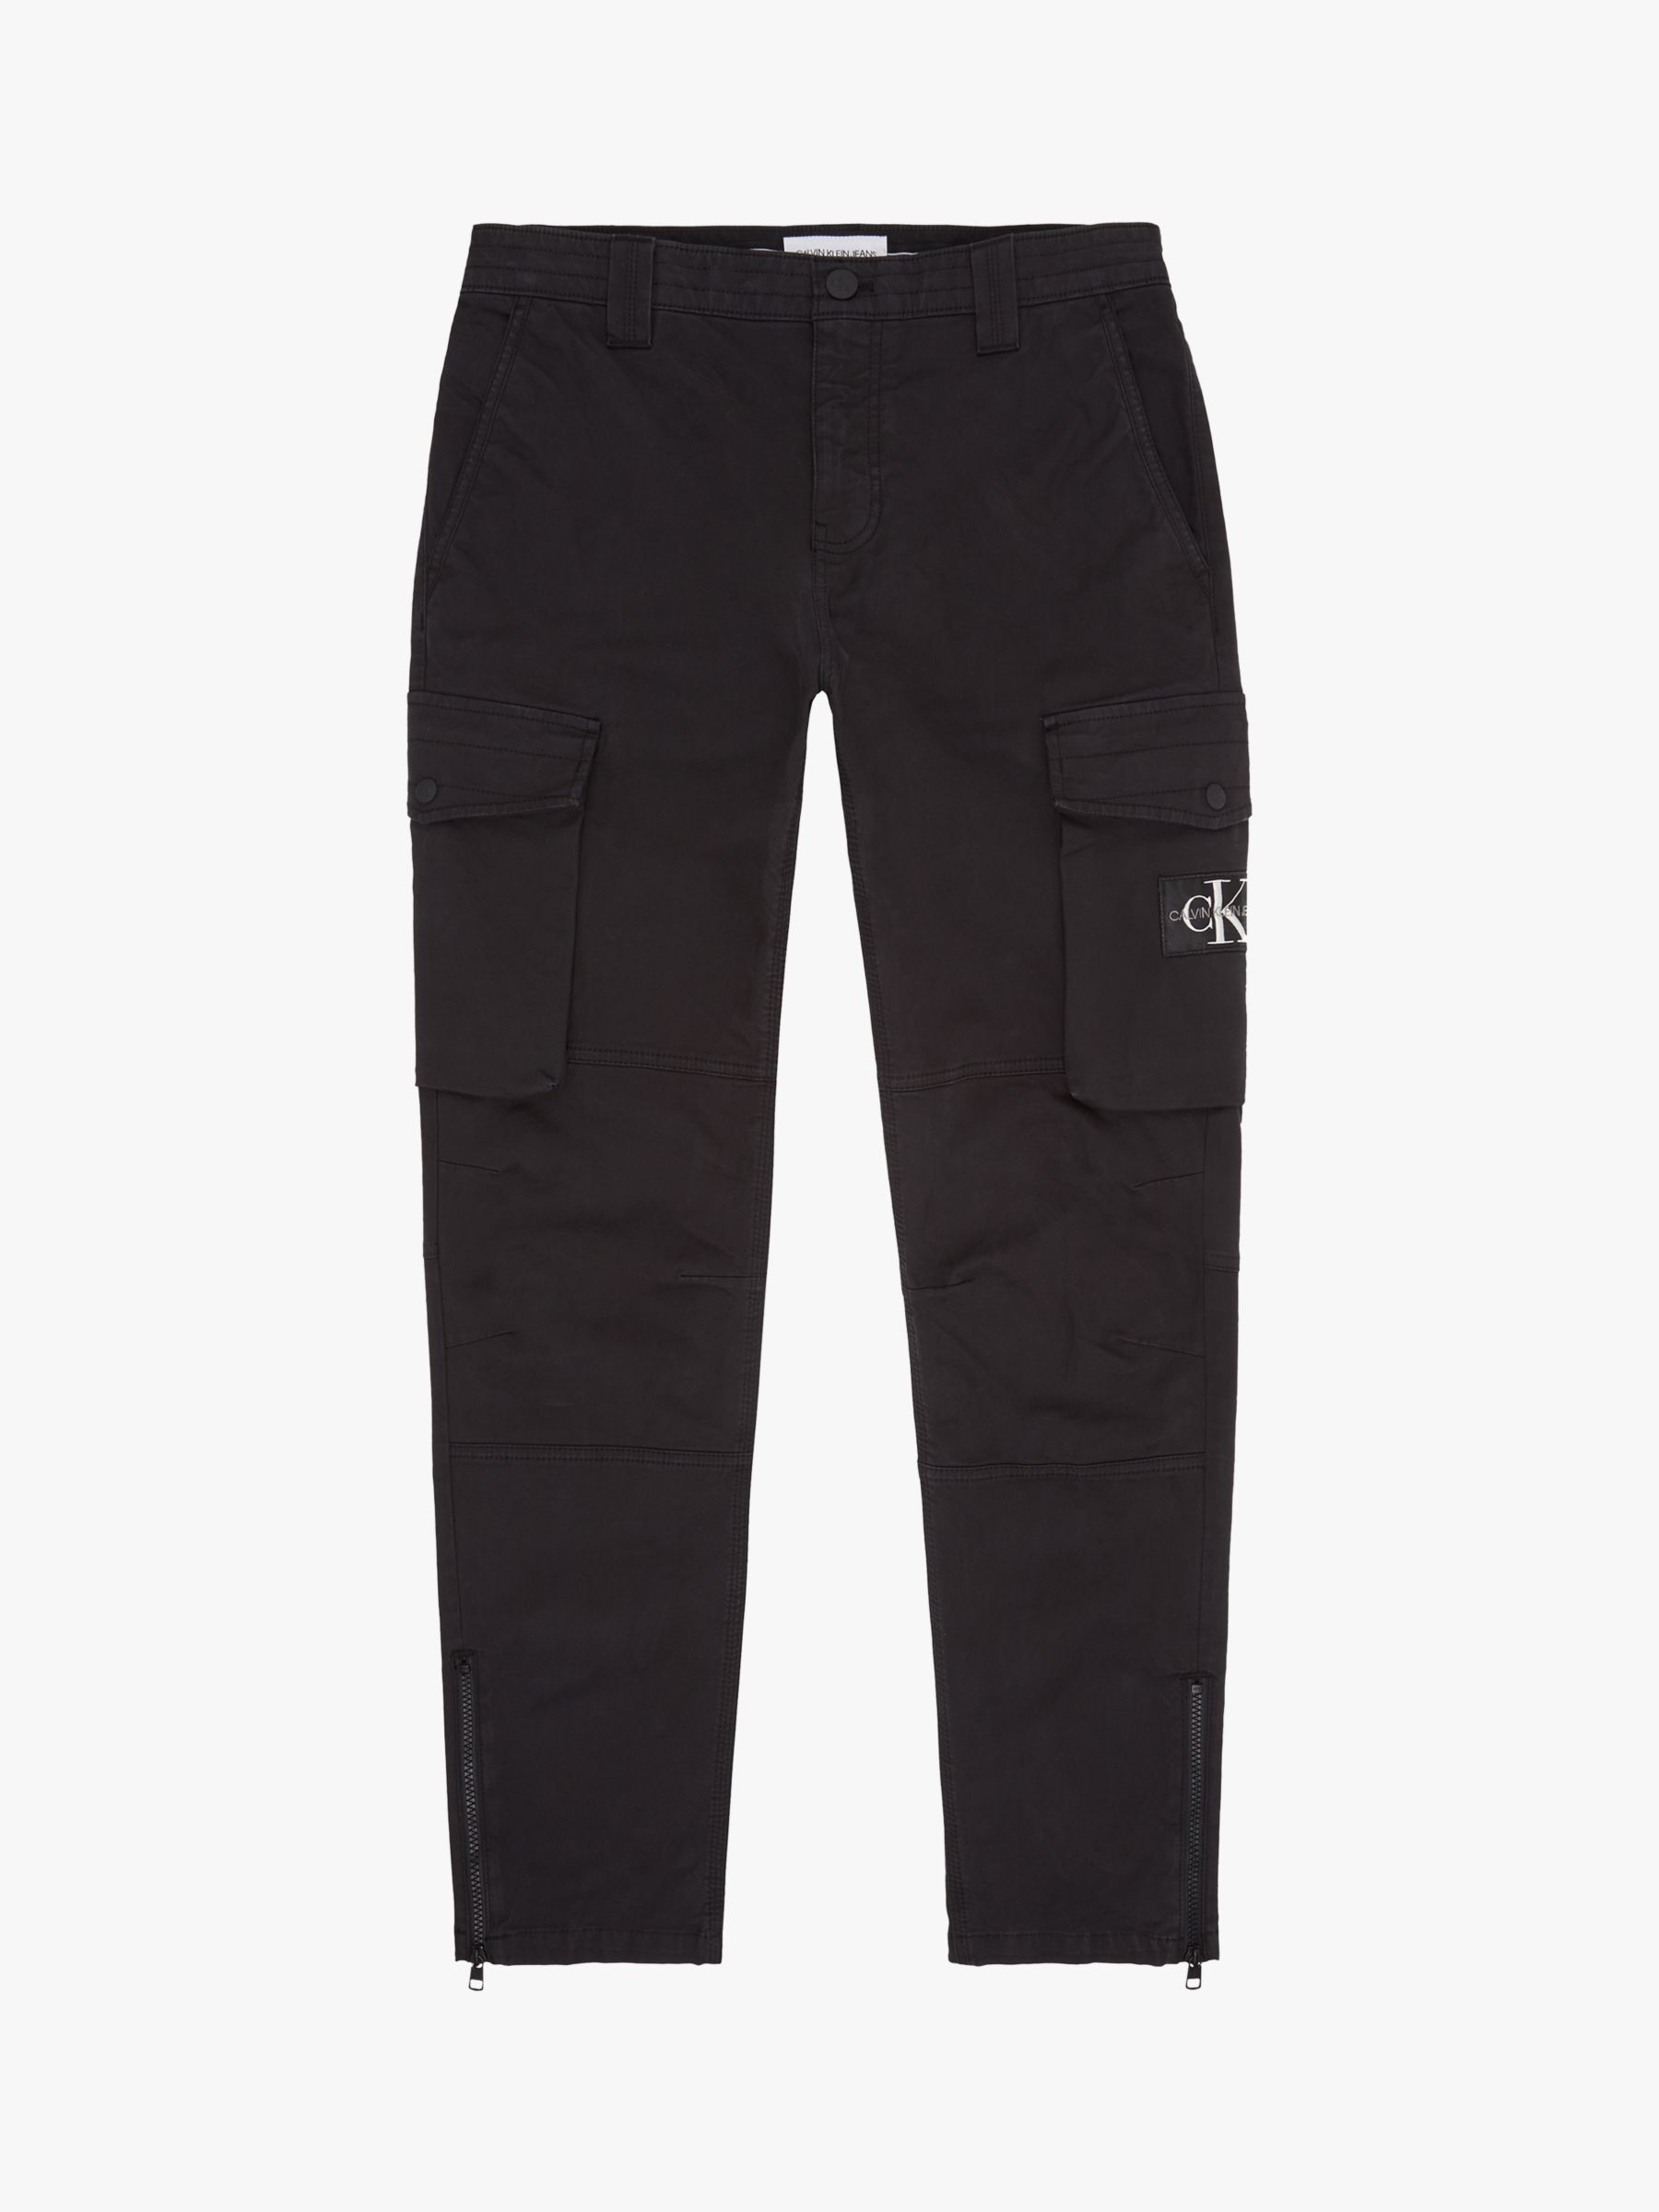 Calvin Klein Jeans Skinny Washed Cotton Blend Cargo Trousers, CK Black ...